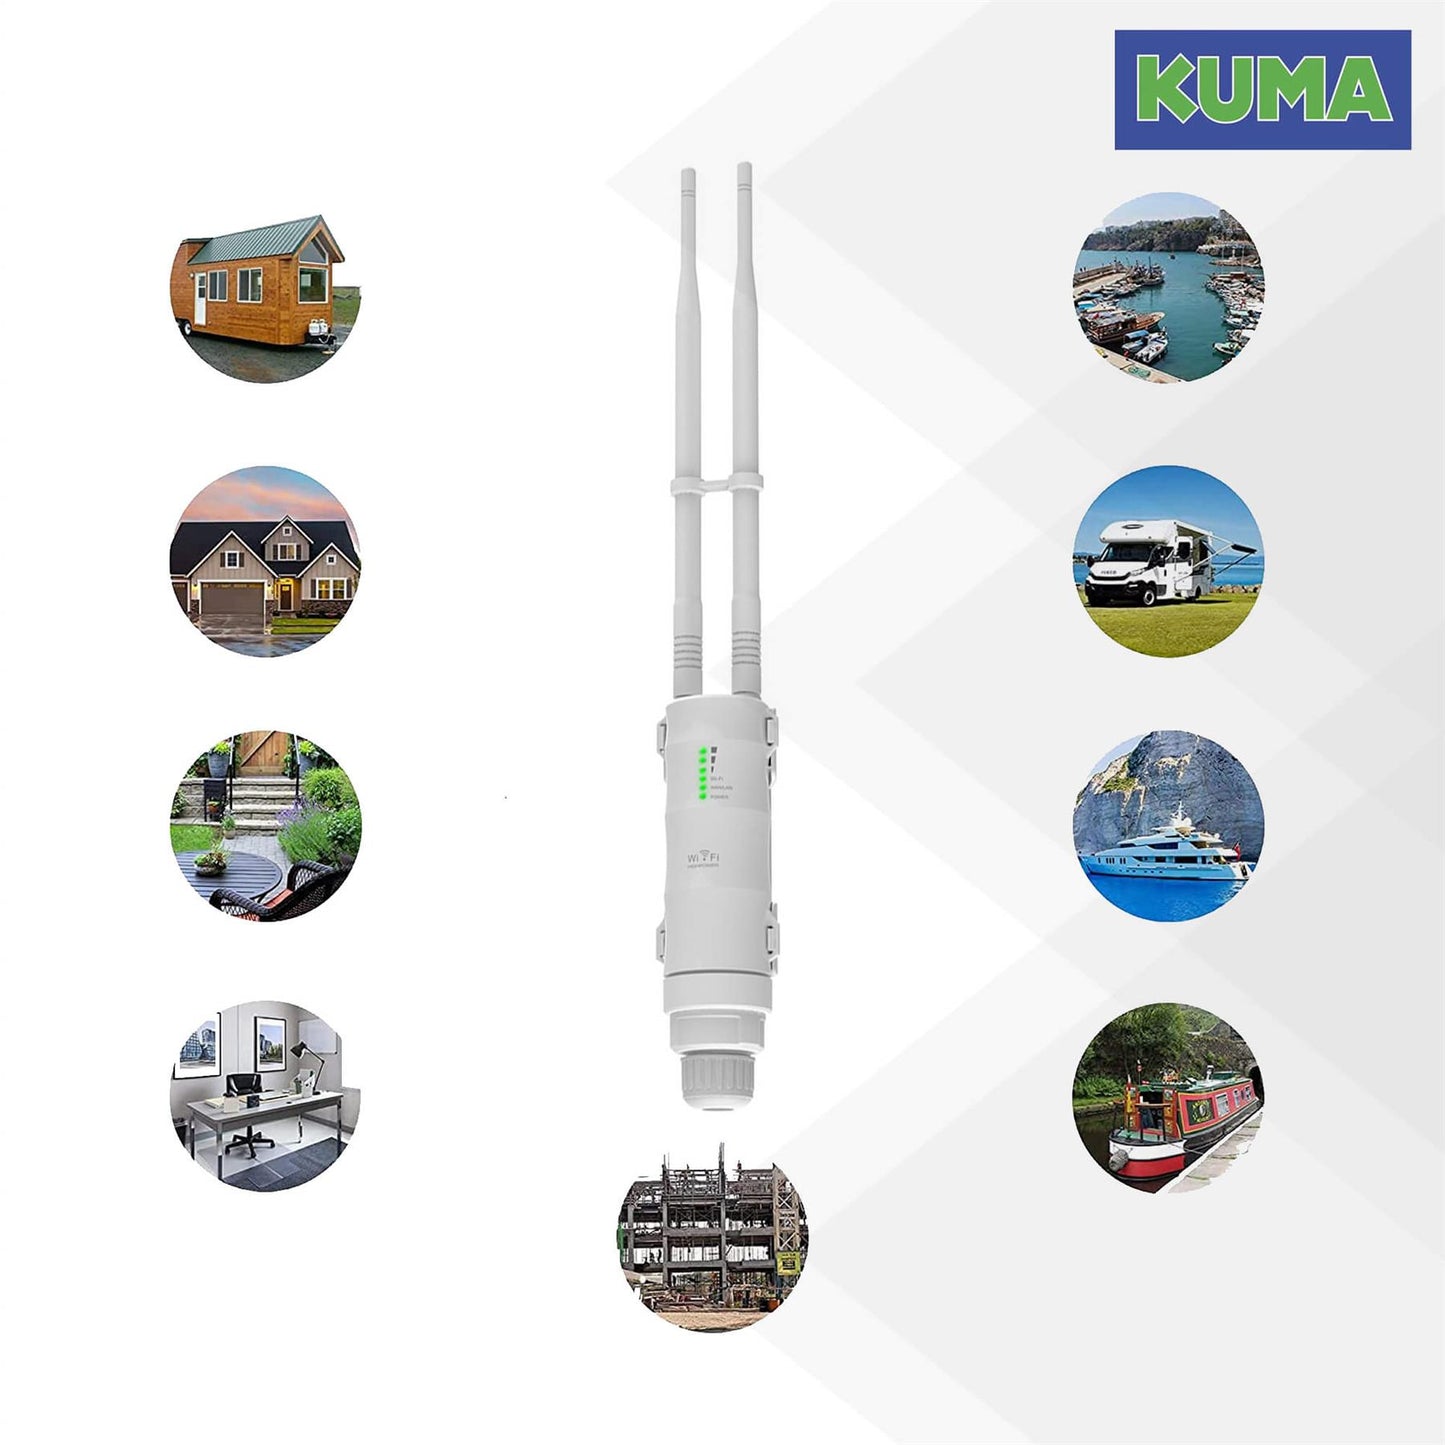 KUMA My-WiFi Hotspot Booster Kit - 12v 5G Dual Band 2.4GHz + 5GHz Wi-Fi Signal Extender Built-in Router Antenna for Caravan Motorhome Boat Garden Office - Portable Wireless Mobile Internet Repeater